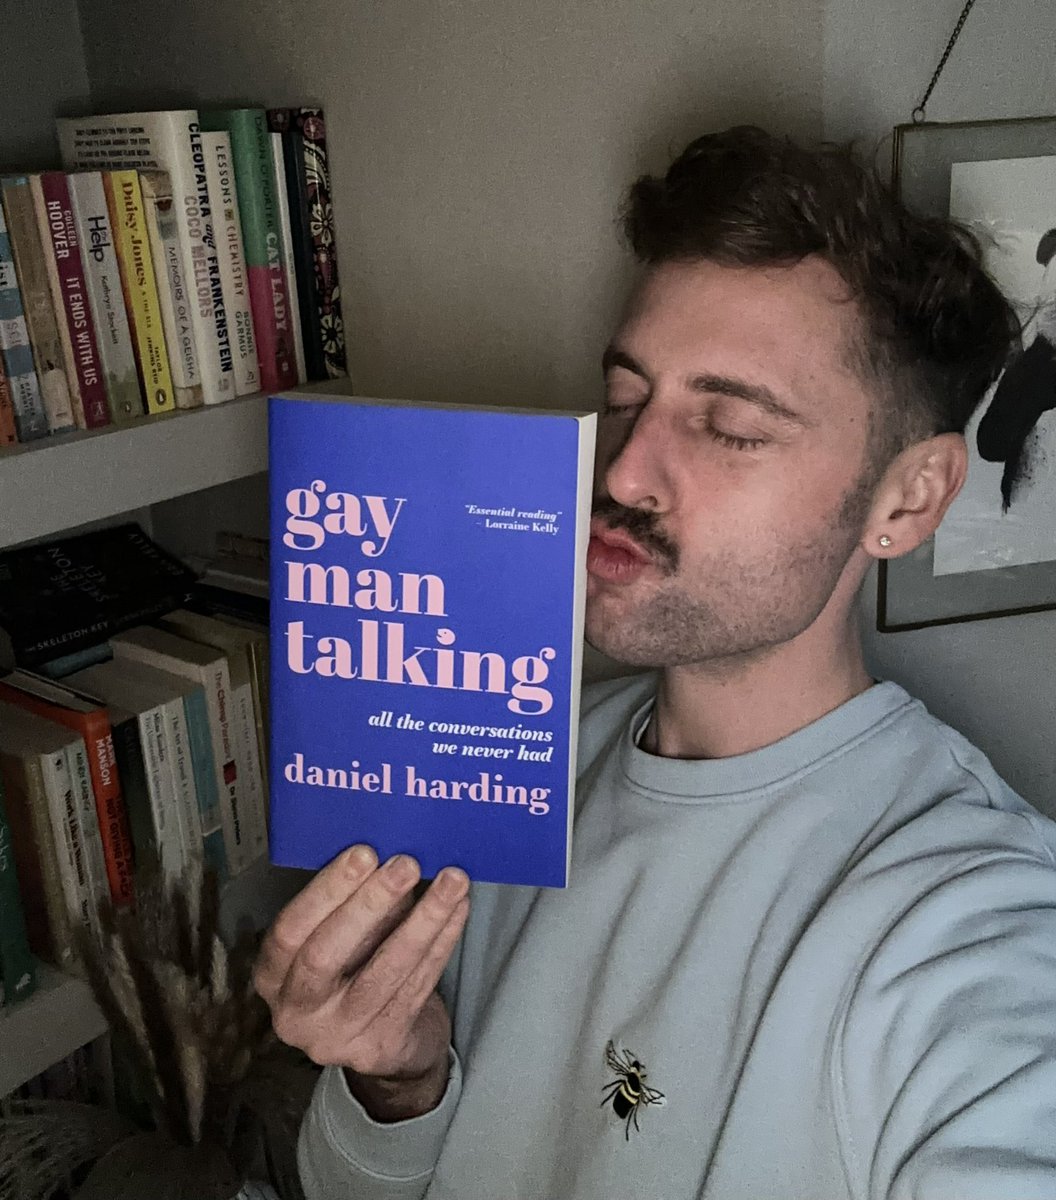 Christmas is coming… So, why not ‘join the conversation’ and pop GayManTalking in Santa’s sack (if you like), fill your stocking… or gift a loved one (yourself.) Support local bookstores this year - lots of brilliant ones tagged in post - and have yourself a gay old time. ❤️